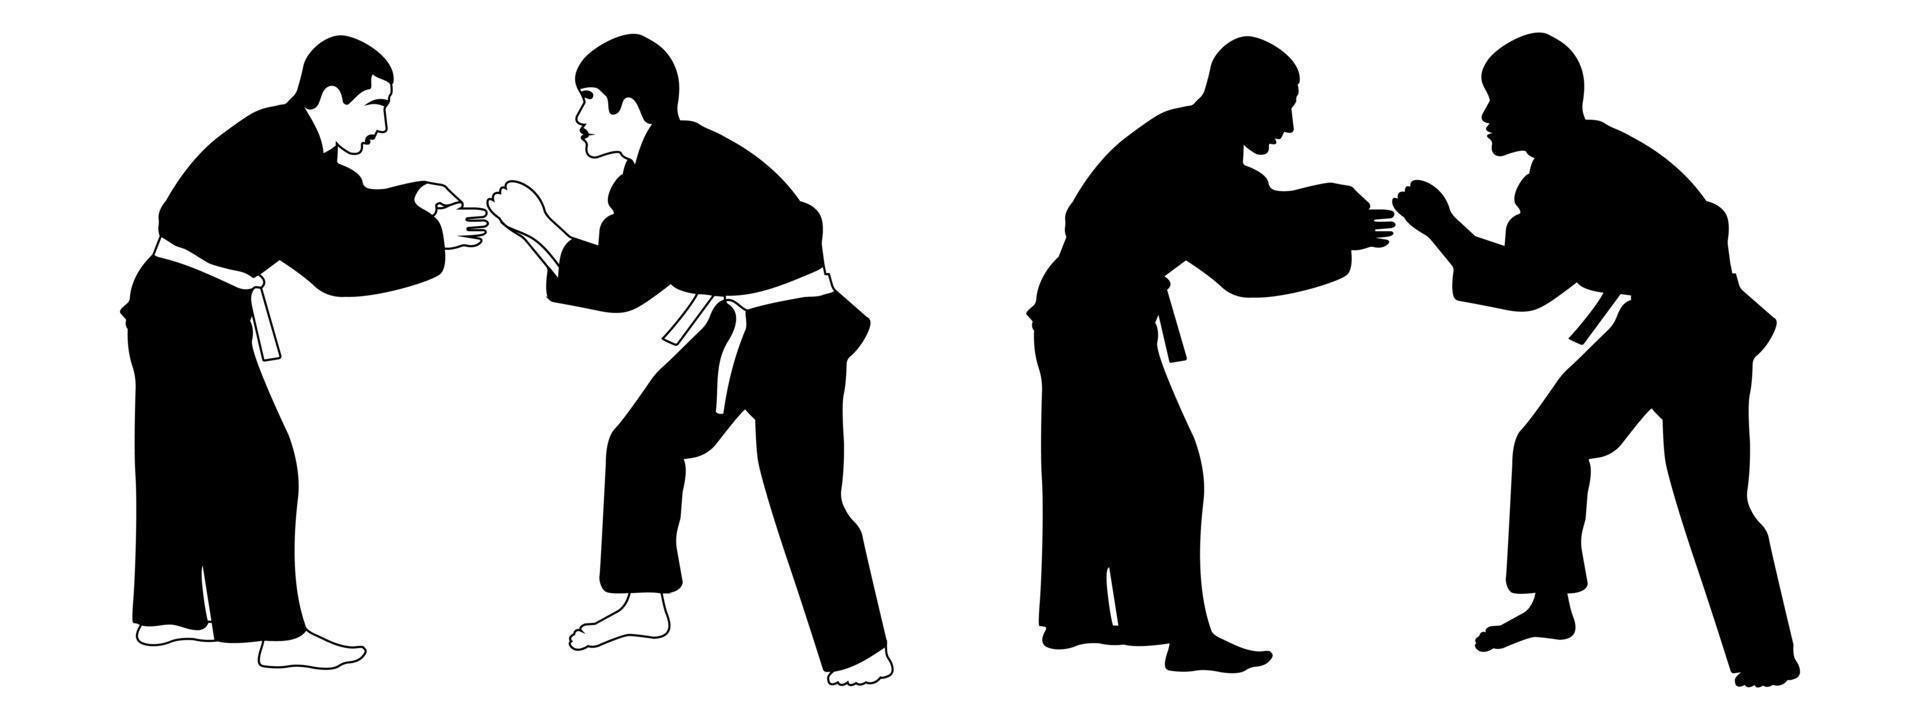 The outline of the black silhouette of a judoka athlete in a duel, fight. Judo sport, martial art. vector